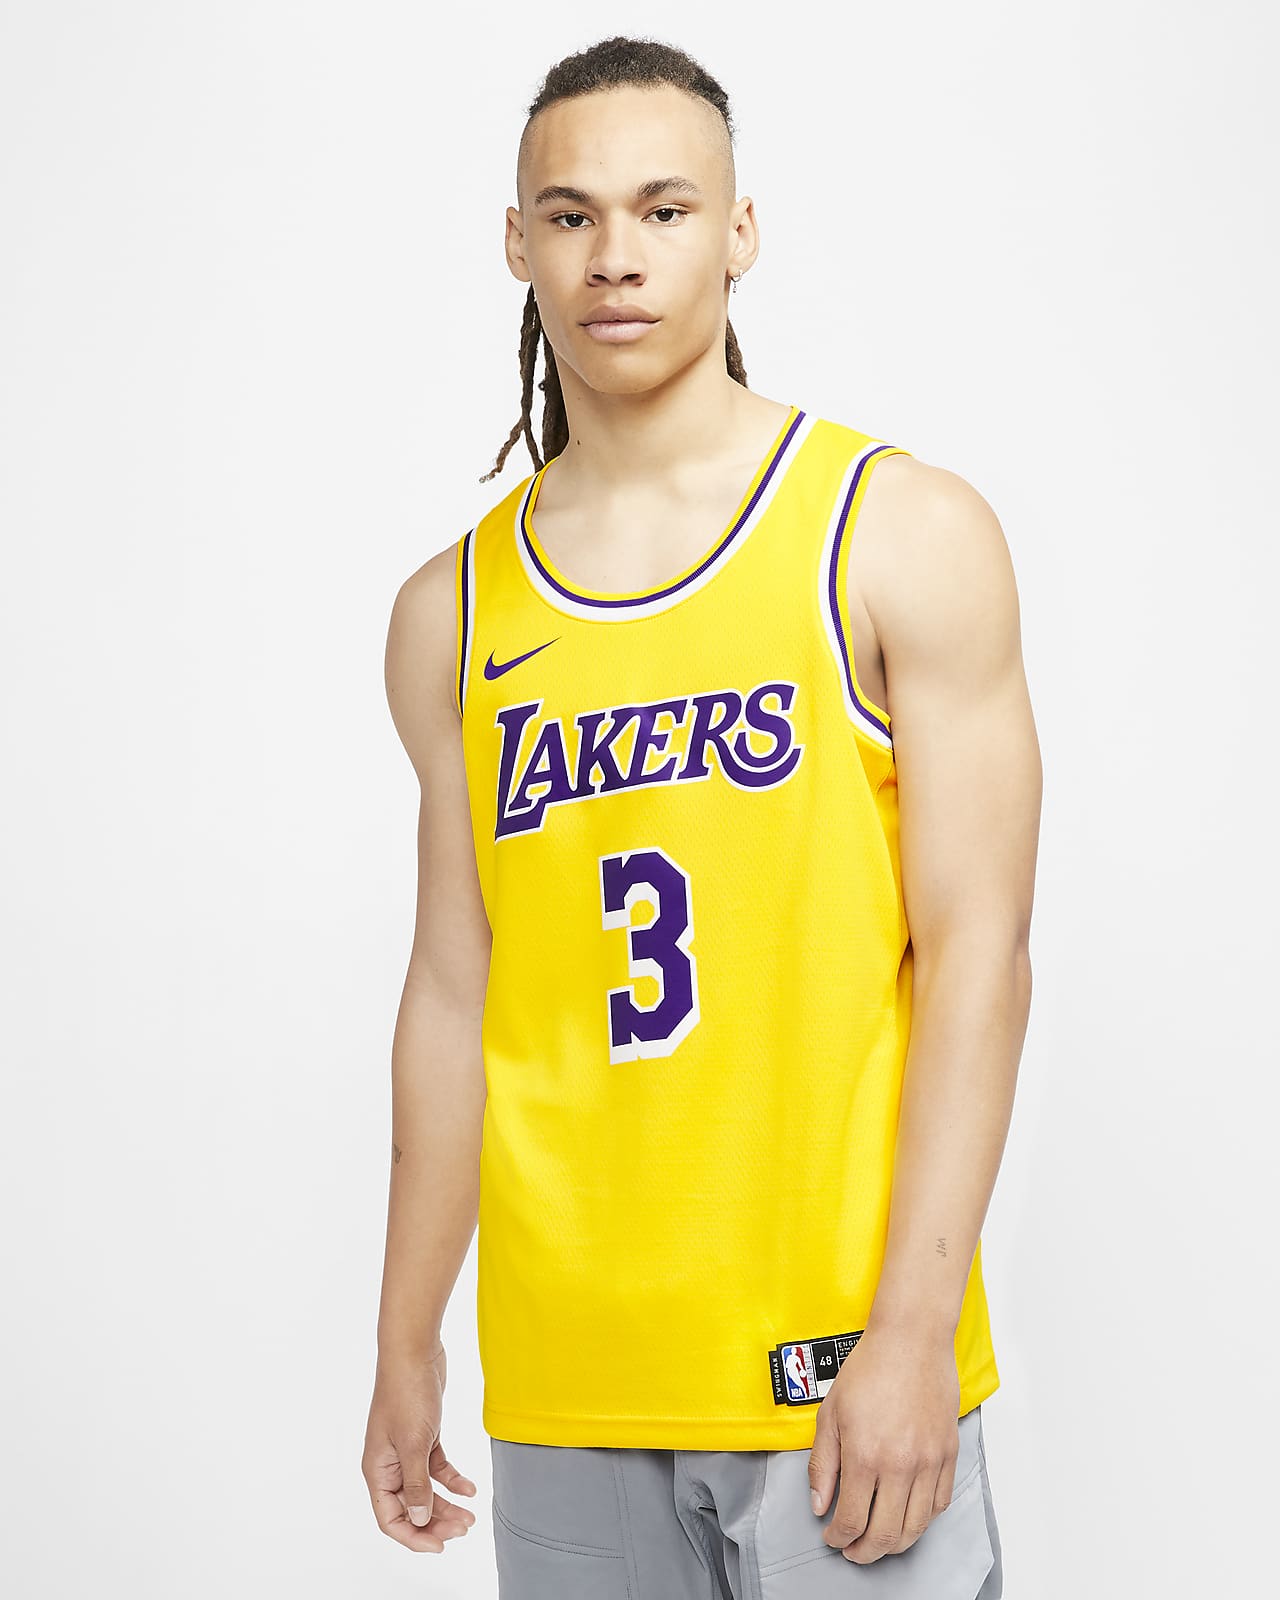 anthony davis lakers jersey Off 55% - www.bashhguidelines.org